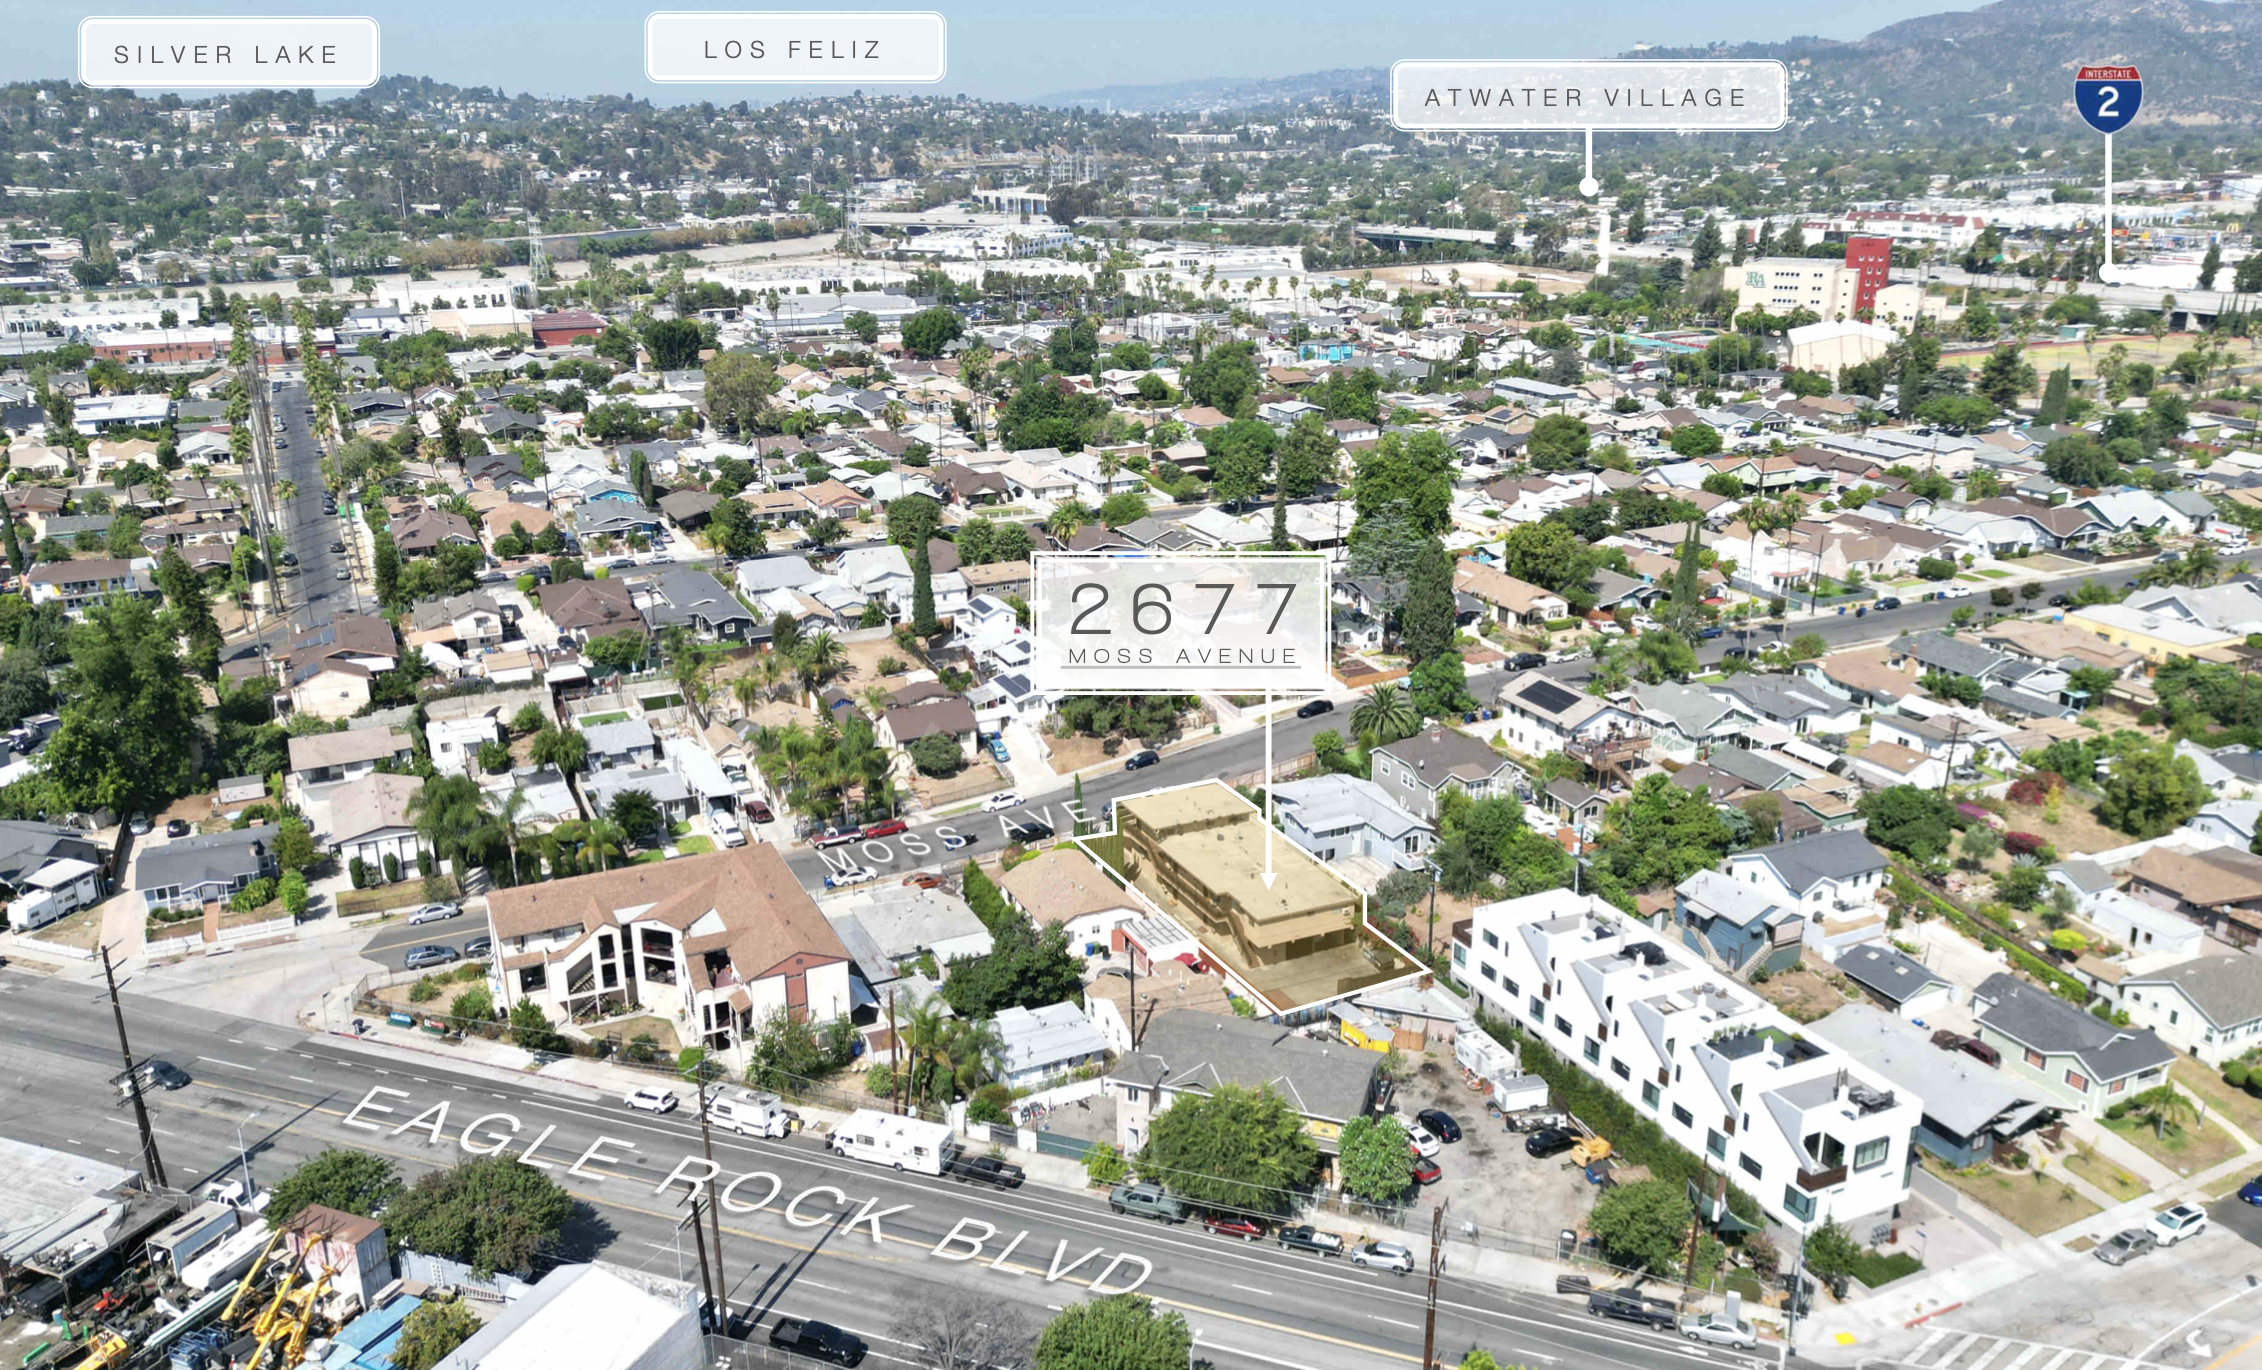 Aerial snapshot with 2677 Moss Avenue, bordered by Silver Lake, Los Feliz, and Atwater Village.